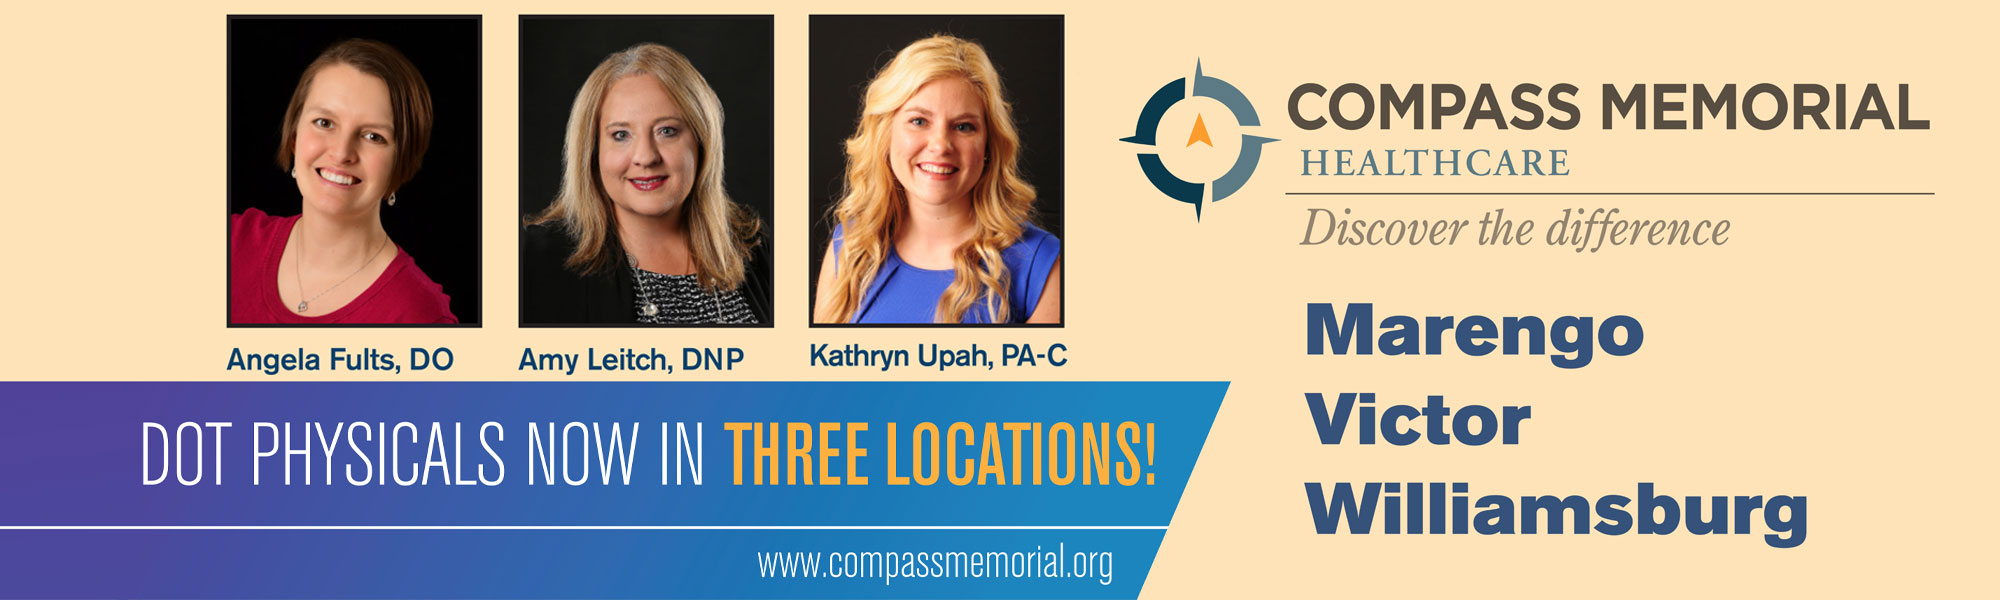 Pictured are 3 Physicians Angela Fults, DO; Amy Leitch, DNP; Kathryn Upah, PA-C

DOT Physicals now in three locations!

Marengo, Victor, Williamsburg